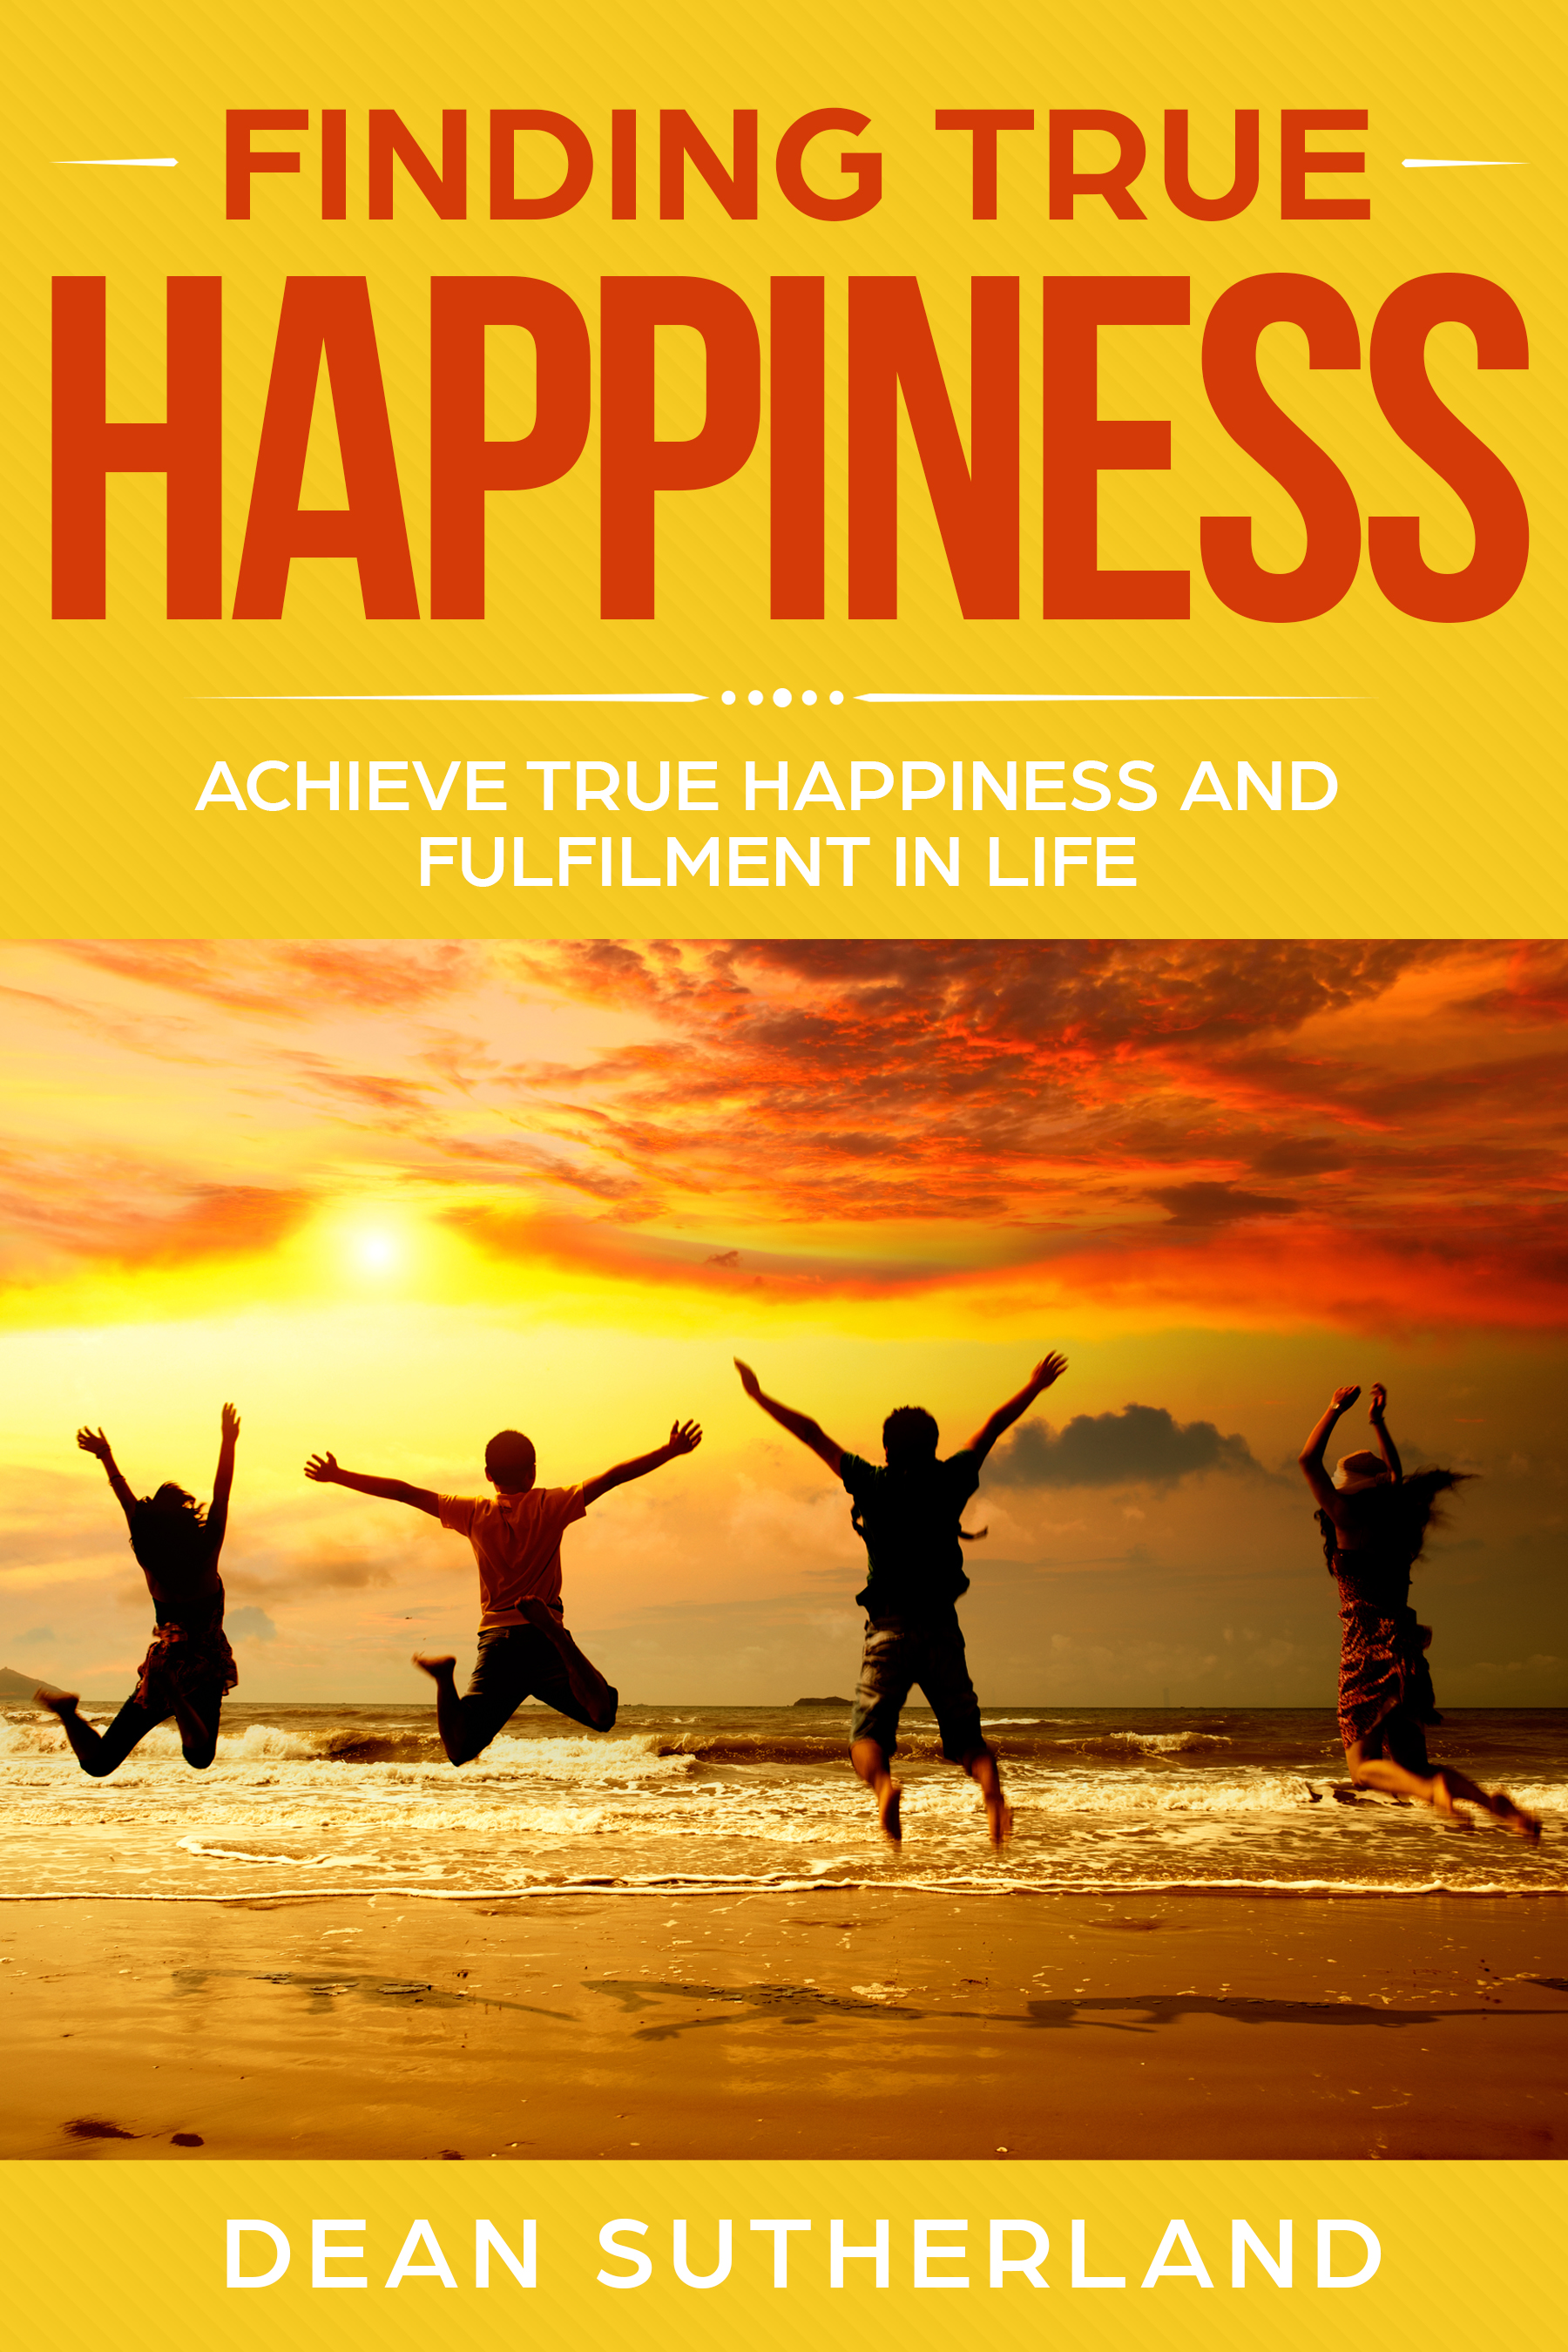 FREE: Finding True Happiness: Achieve True Happiness and Fulfilment in Life by Dean Sutherland